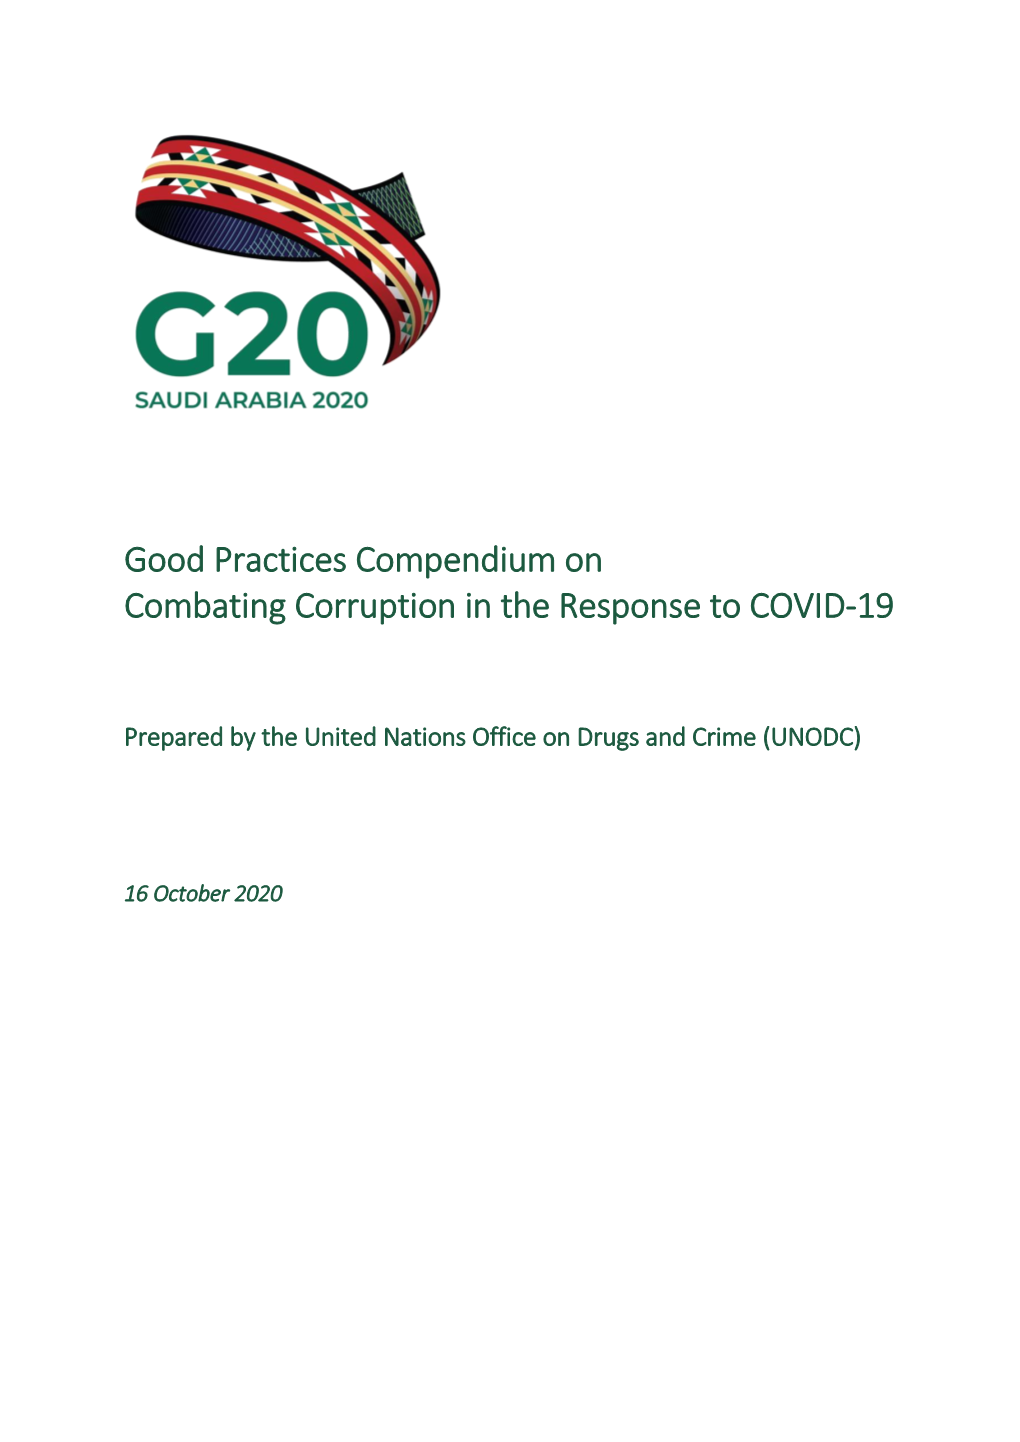 Good Practices Compendium on Combating Corruption in the Response to COVID-19